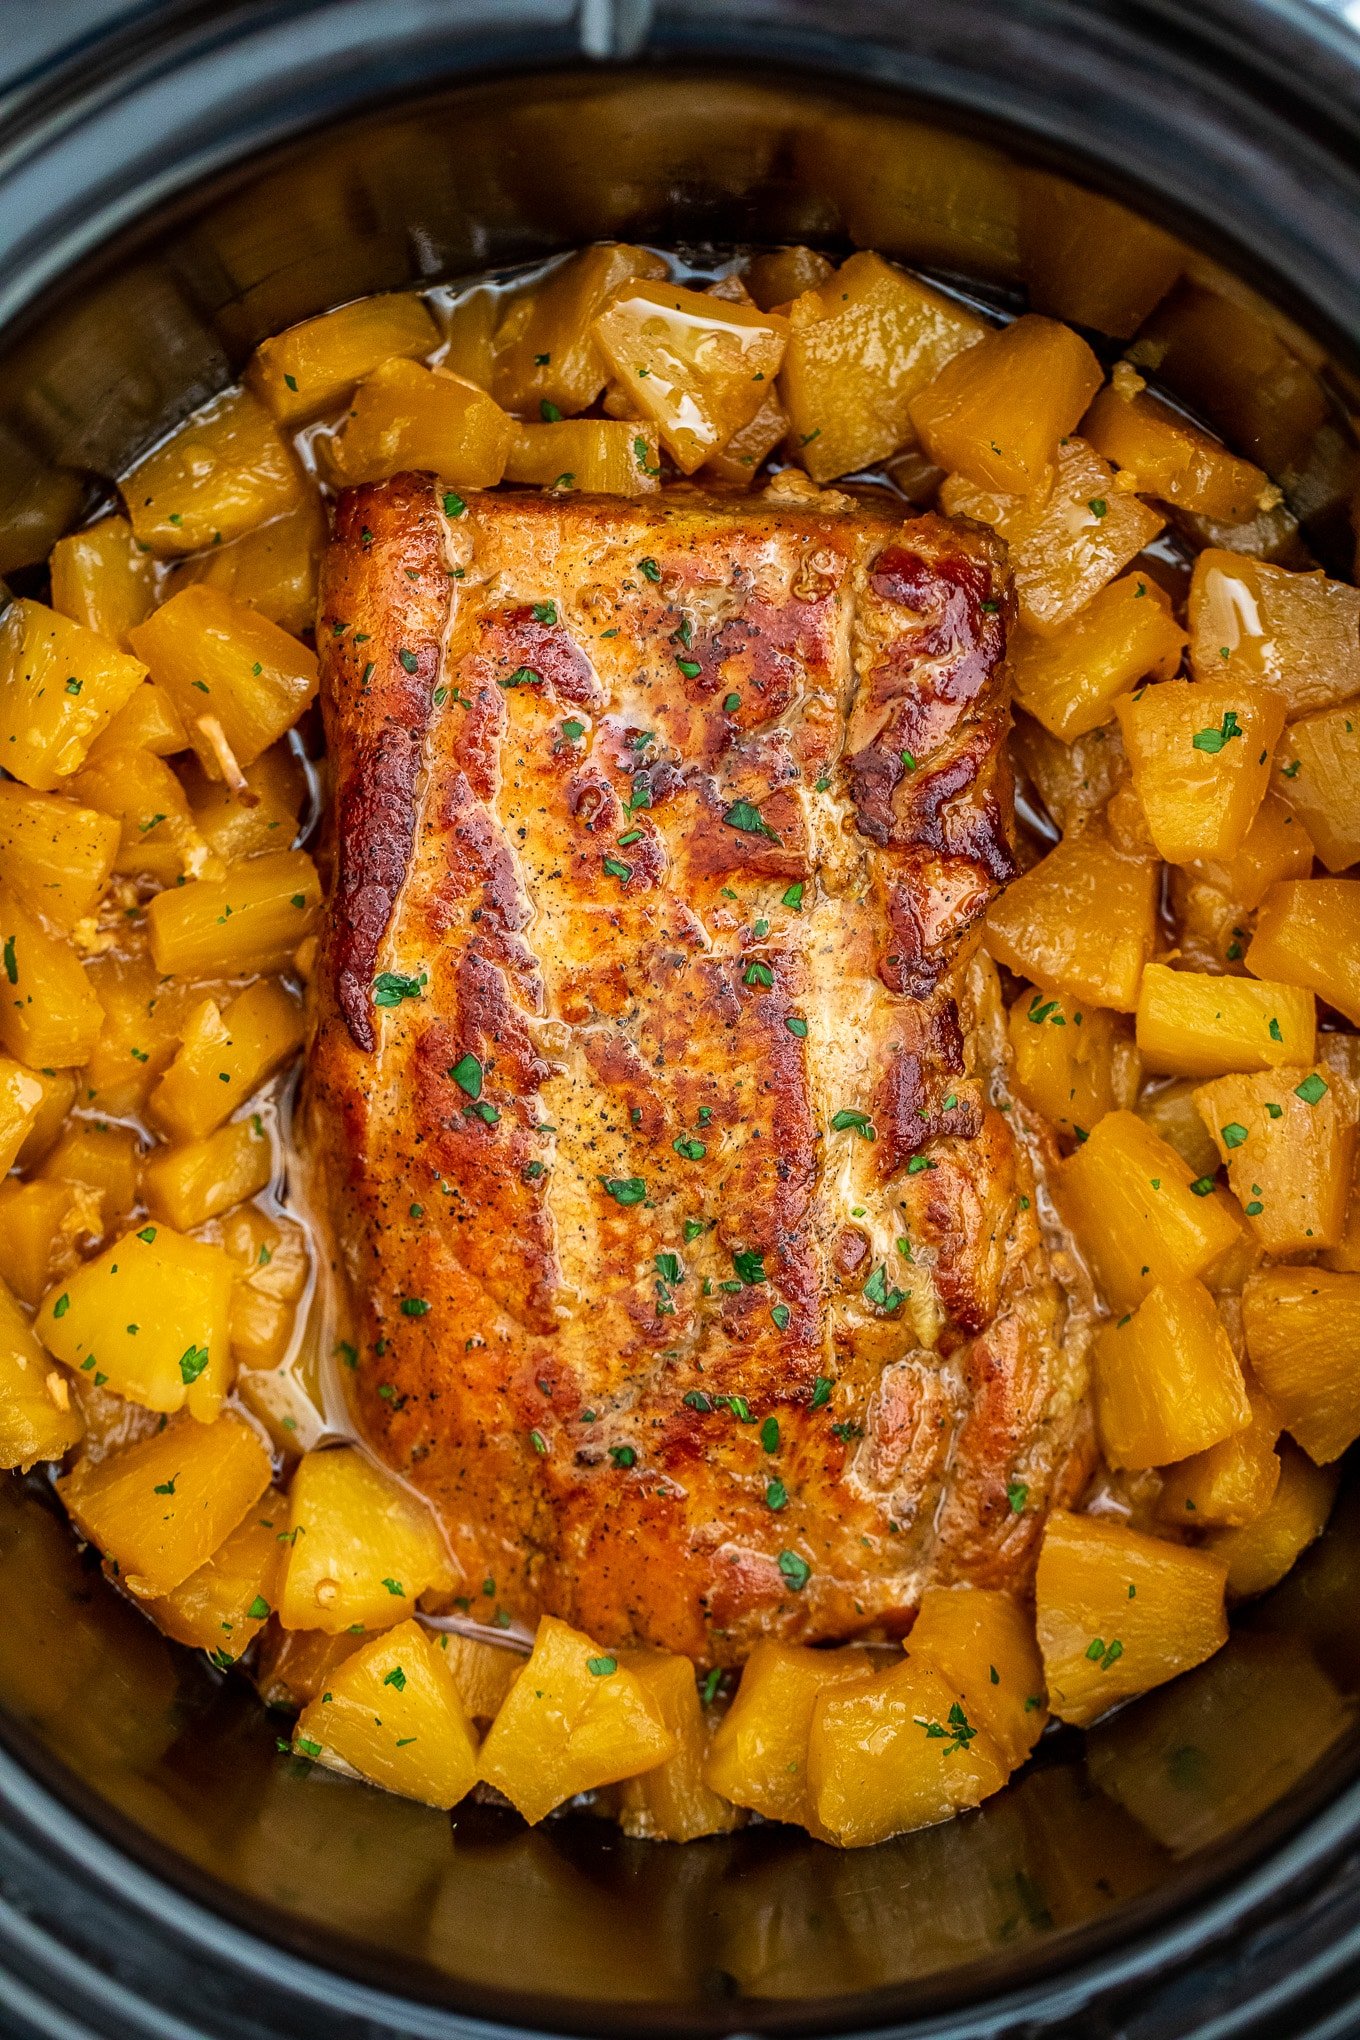 Slow Cooker Pork Loin Pineapple Recipe Video Sweet And Savory Meals,Bathroom Decorating Ideas Gray